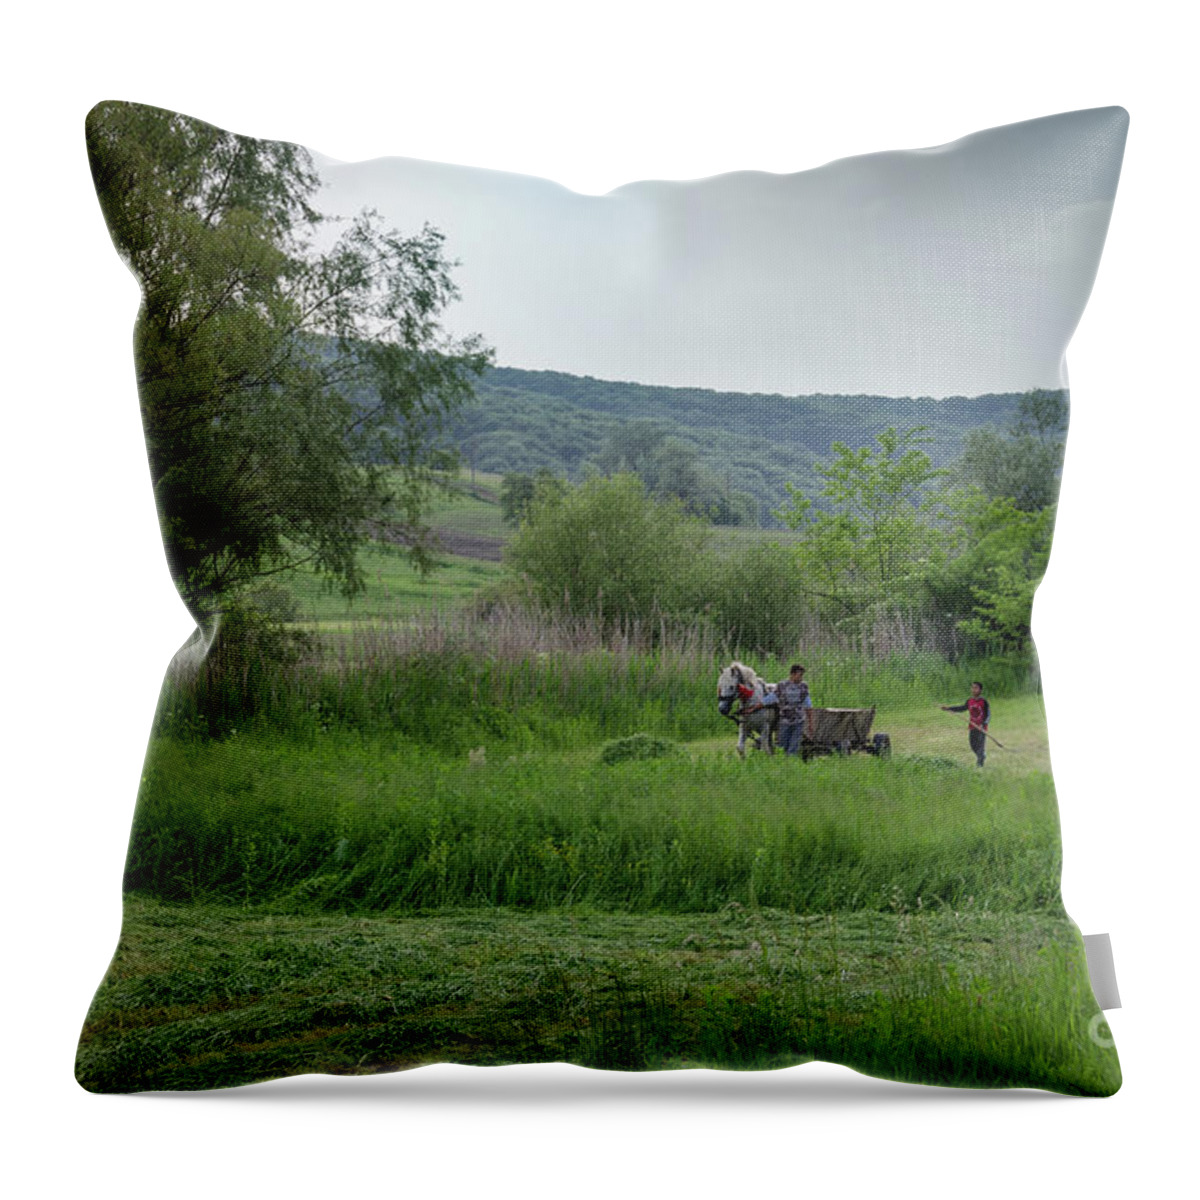 Malancrav Throw Pillow featuring the photograph Horsedrawn Haycart, Transylvania 2 by Perry Rodriguez